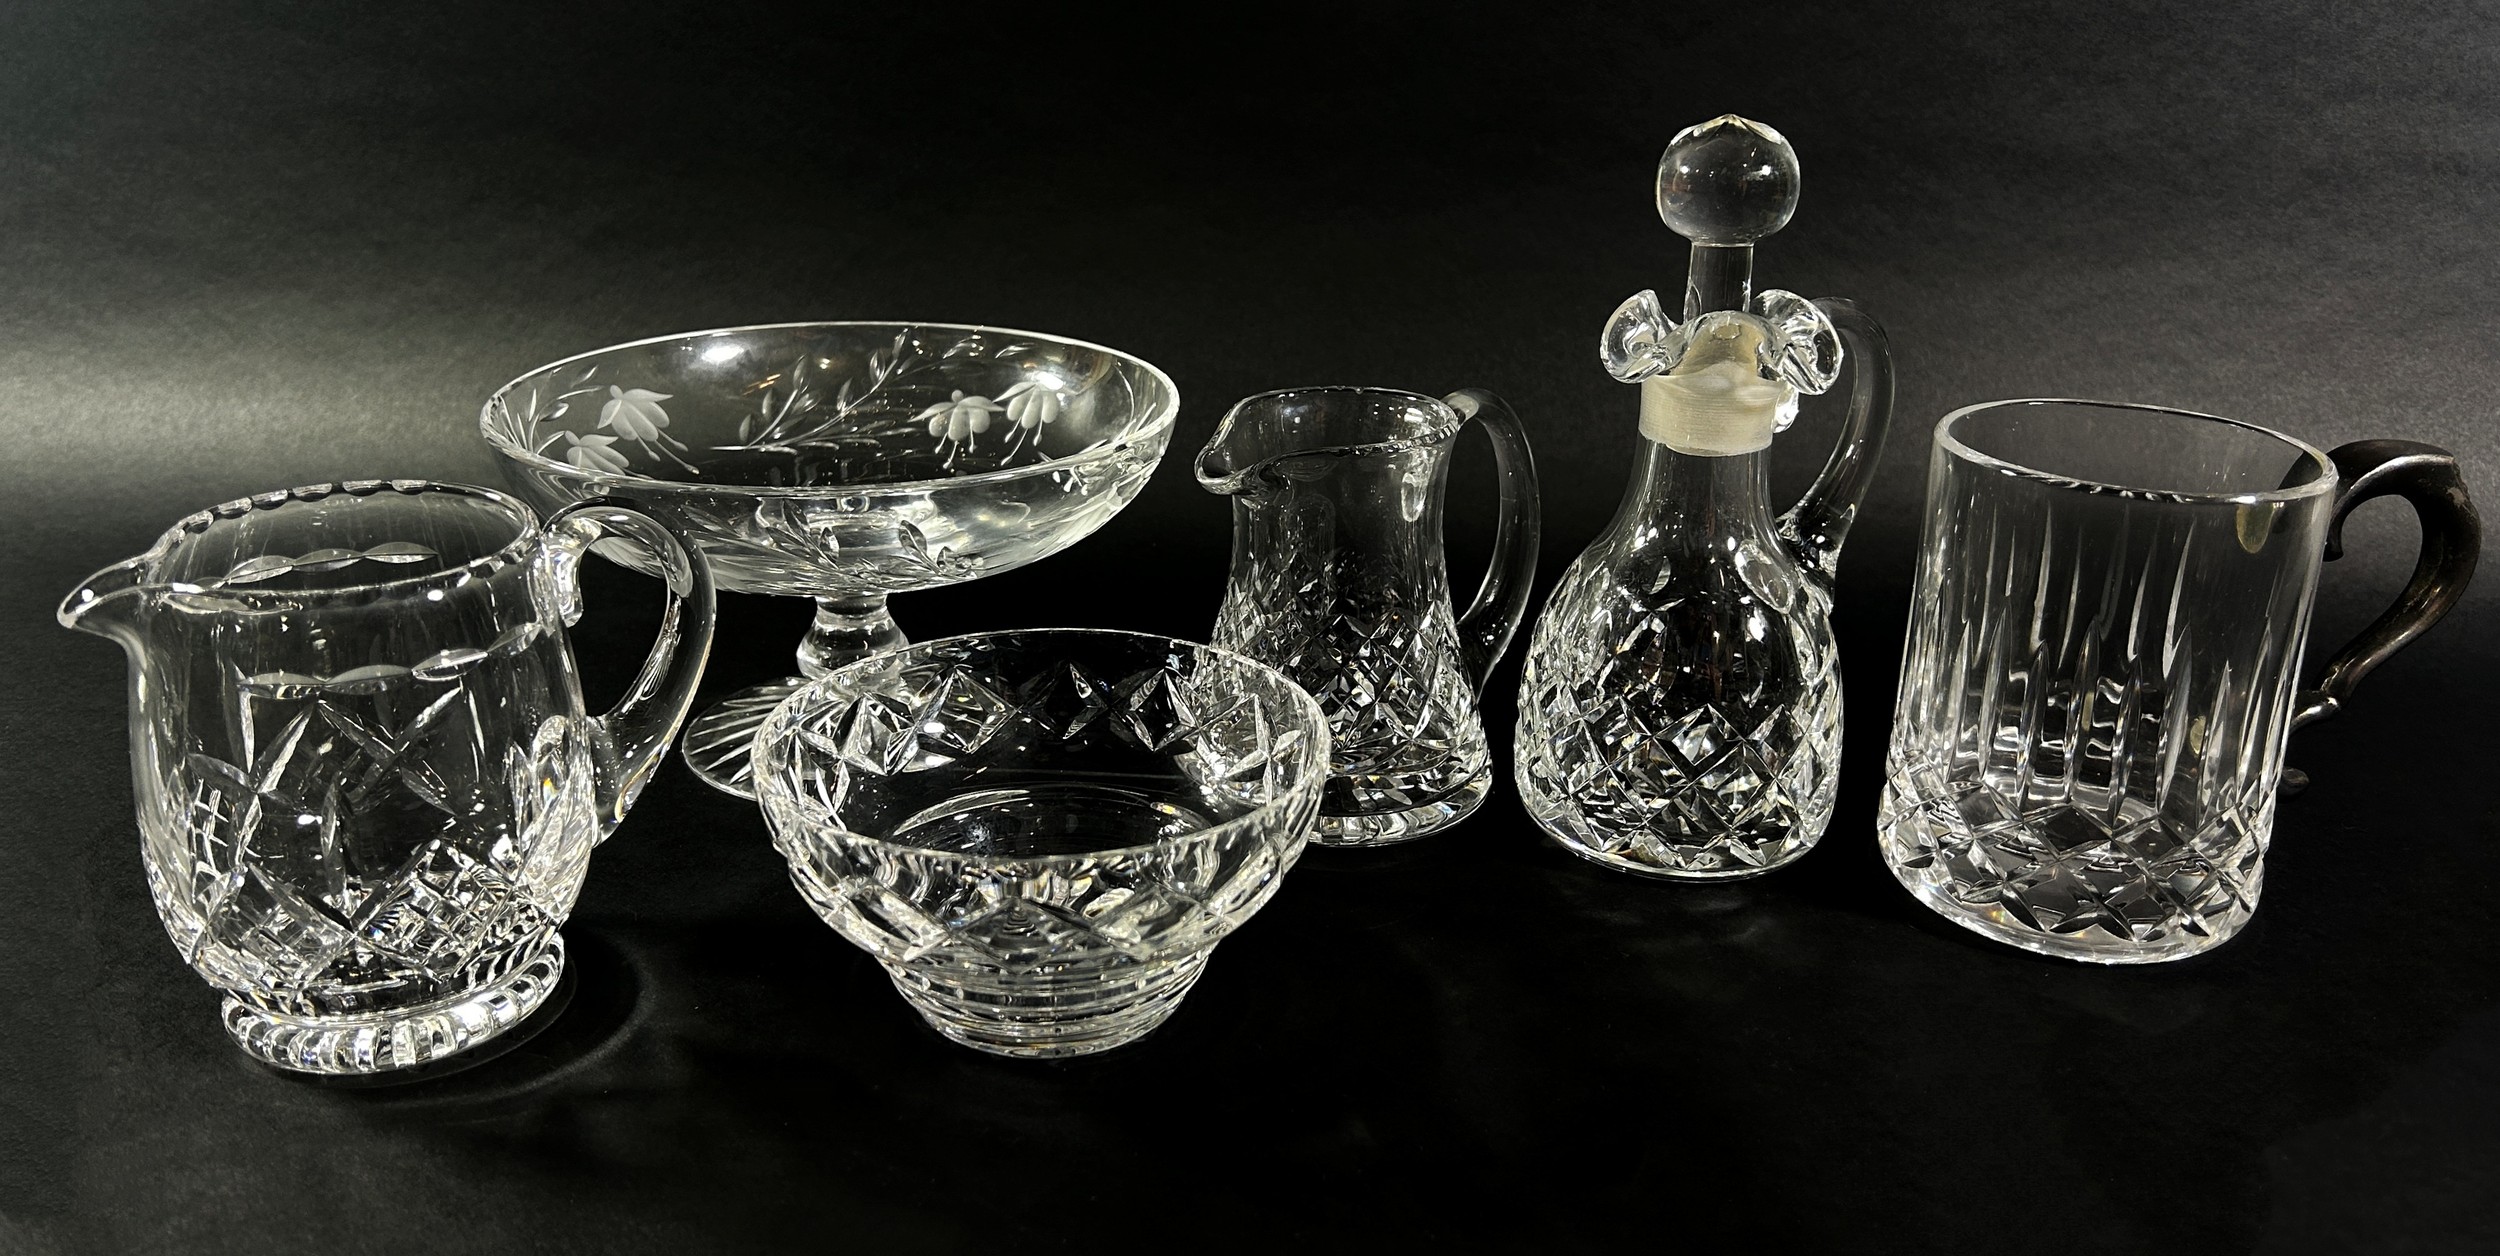 A mixed selection of cut glass including red wine glasses, white wine, brandy balloons, tumblers, - Image 3 of 3